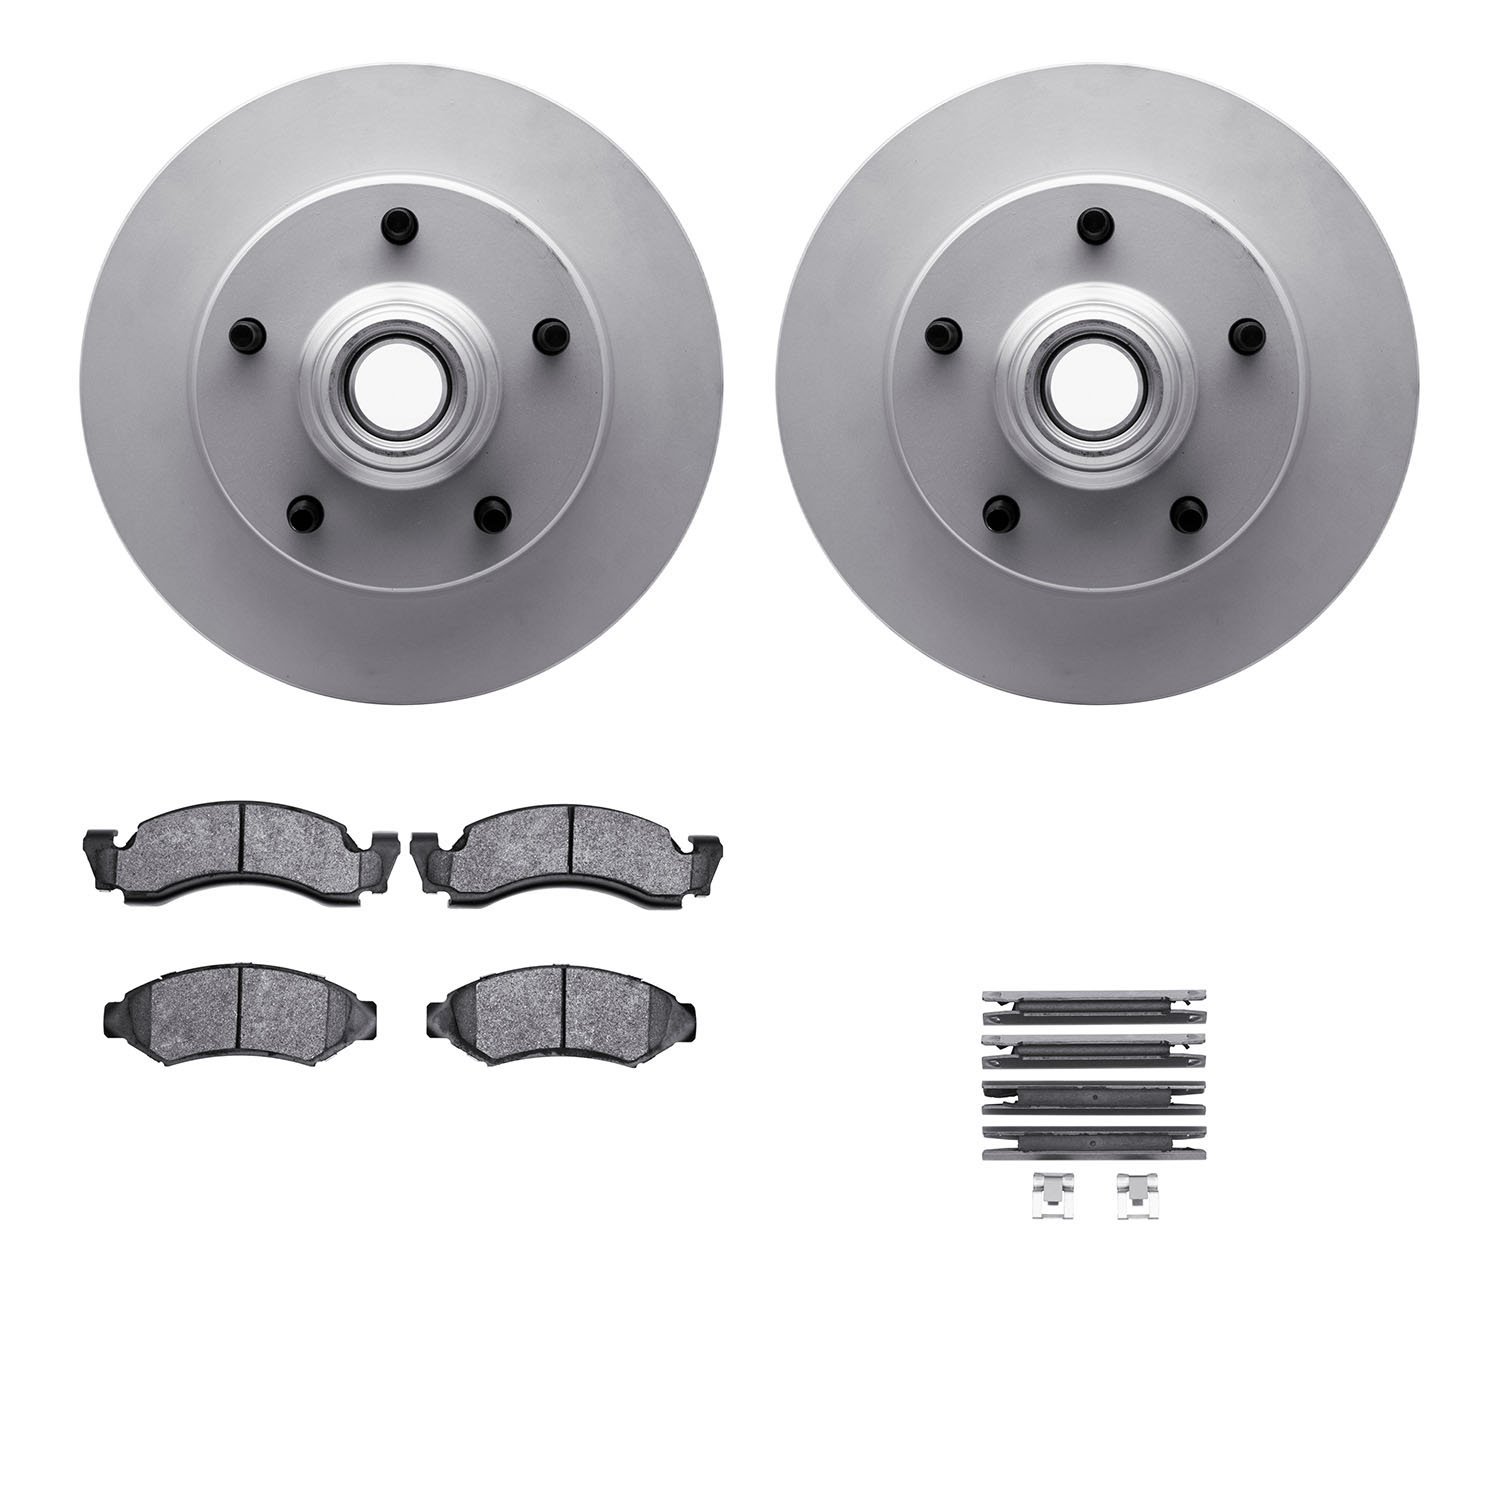 4412-54003 Geospec Brake Rotors with Ultimate-Duty Brake Pads & Hardware, 1986-1993 Ford/Lincoln/Mercury/Mazda, Position: Front